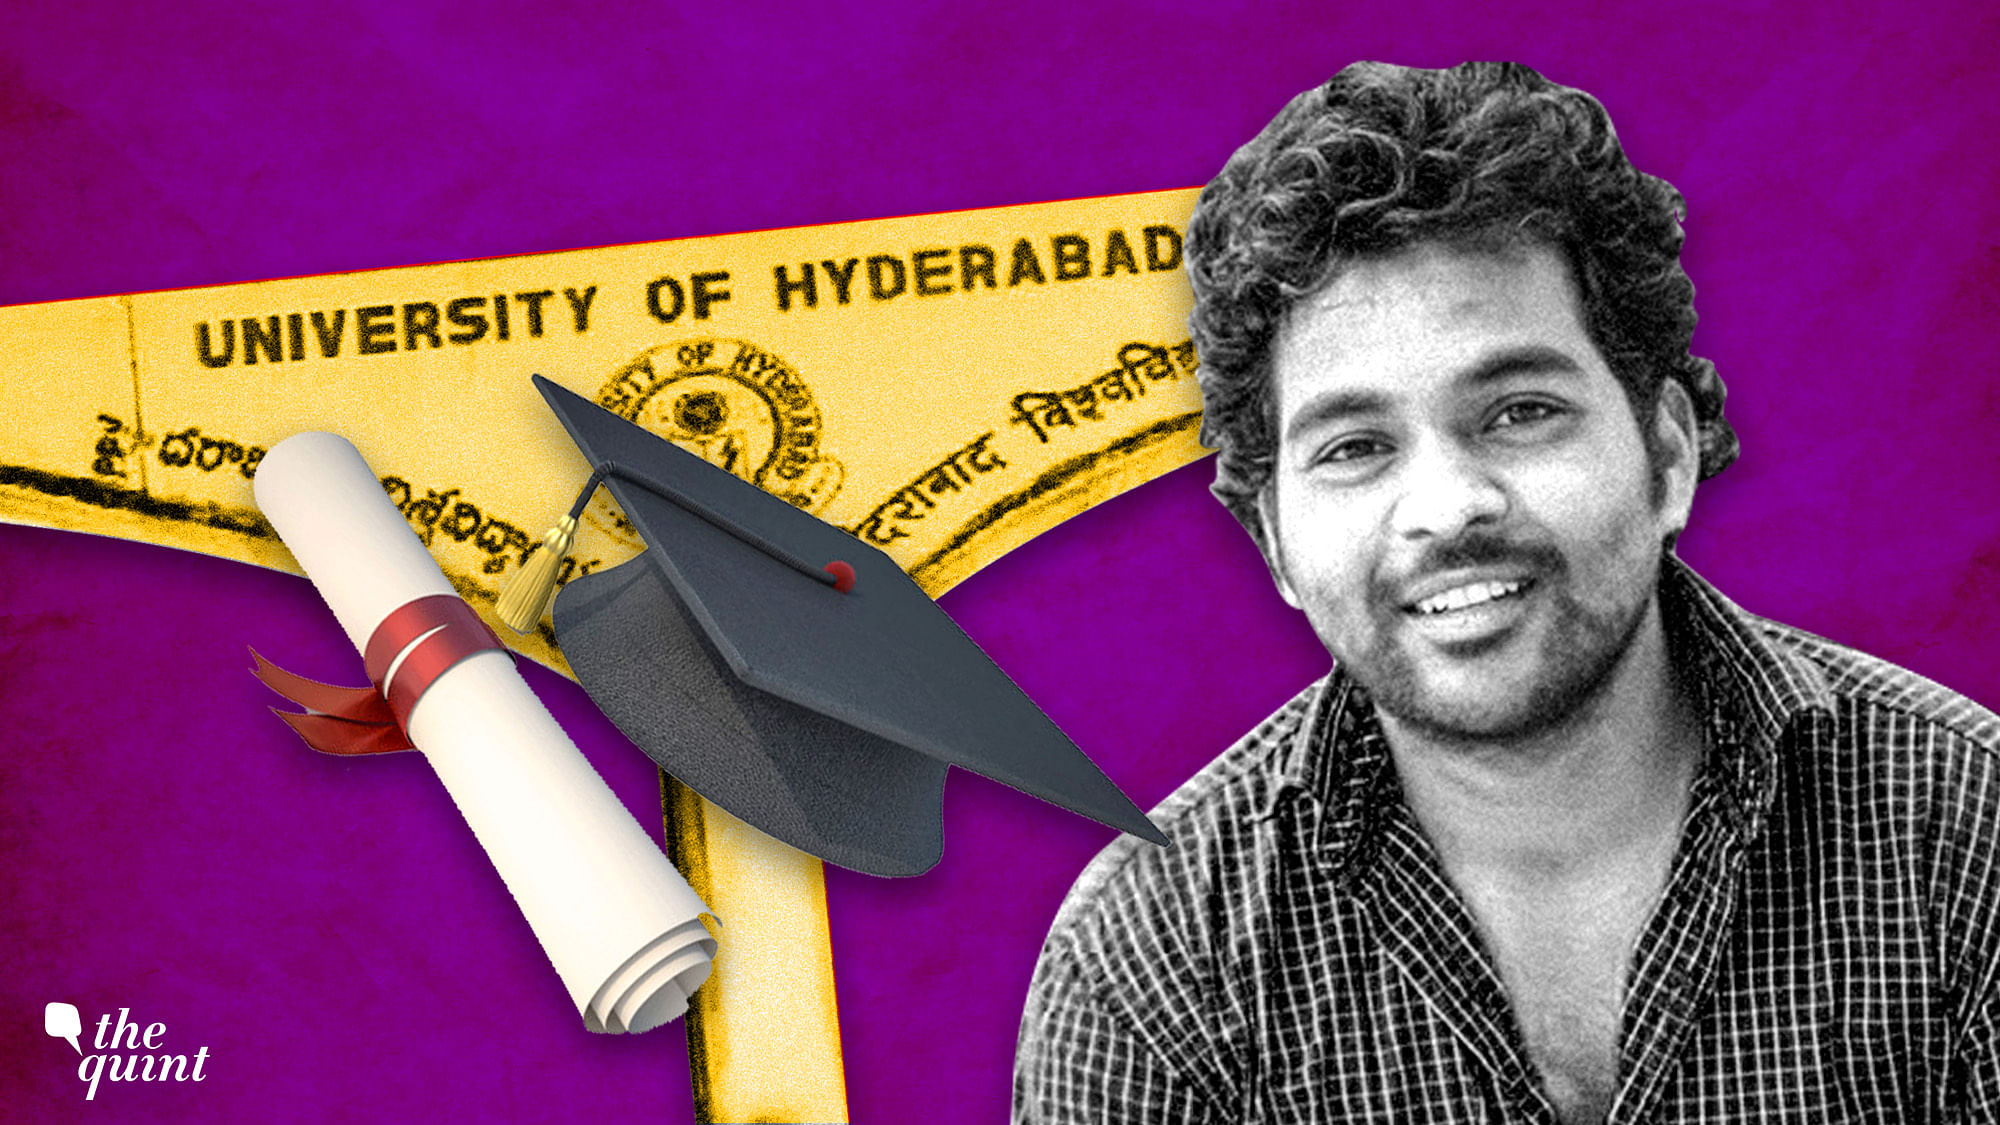 Image of Rohith Vemula and University of Hyderabad plaque used for representational purposes.&nbsp;